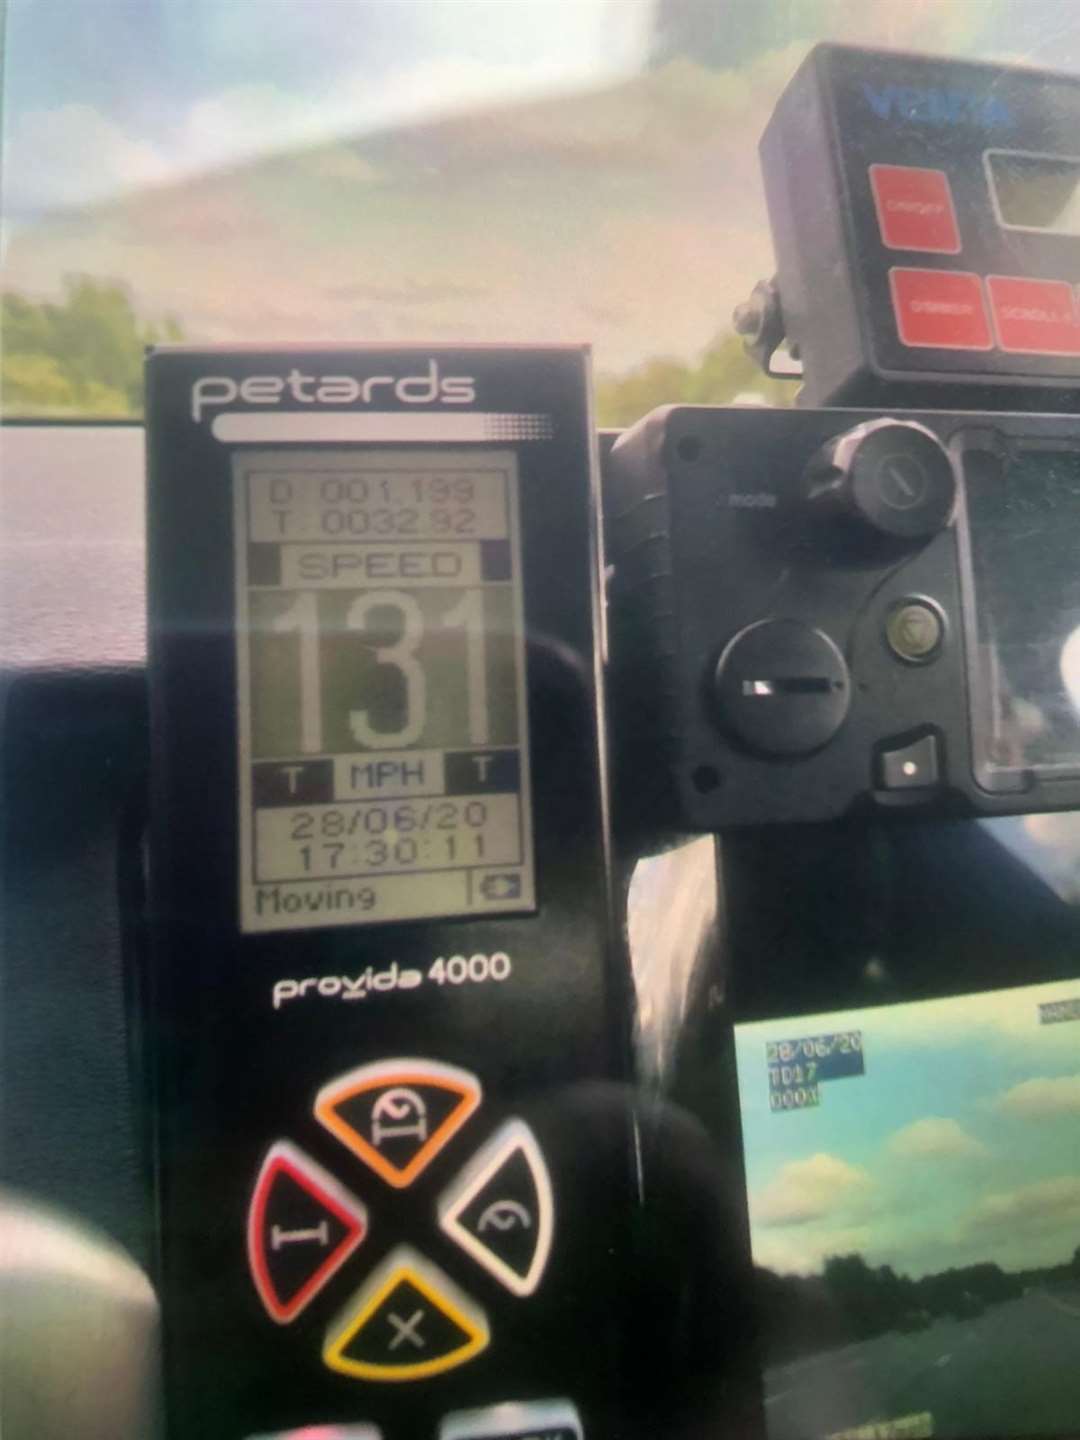 A driver is facing a ban after being clocked at 131mph. Photo: Kent Police RPU